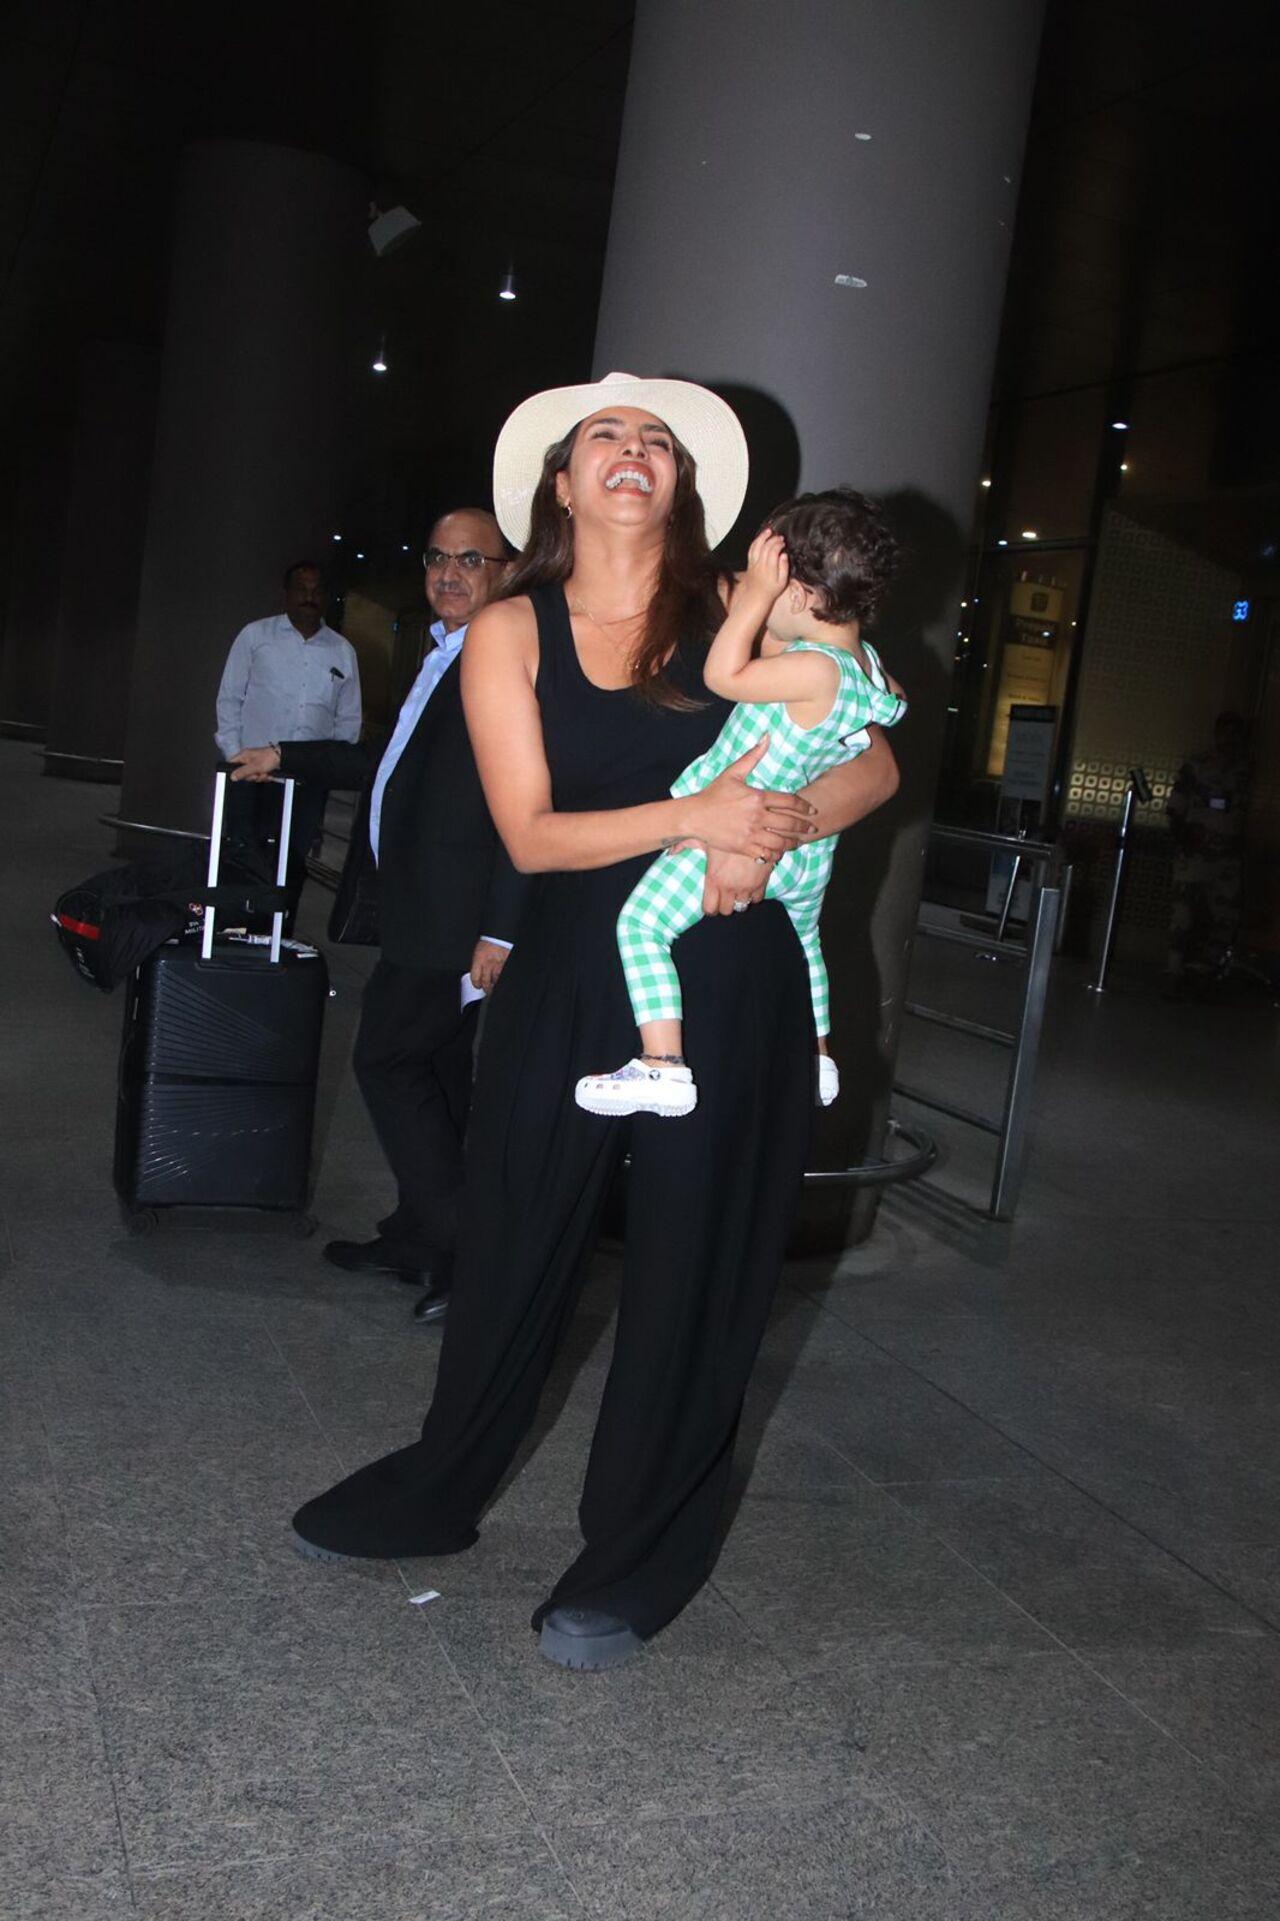 Priyanka Chopra Jonas has a laugh out loud moment as she poses for the paparazzi with her daughter